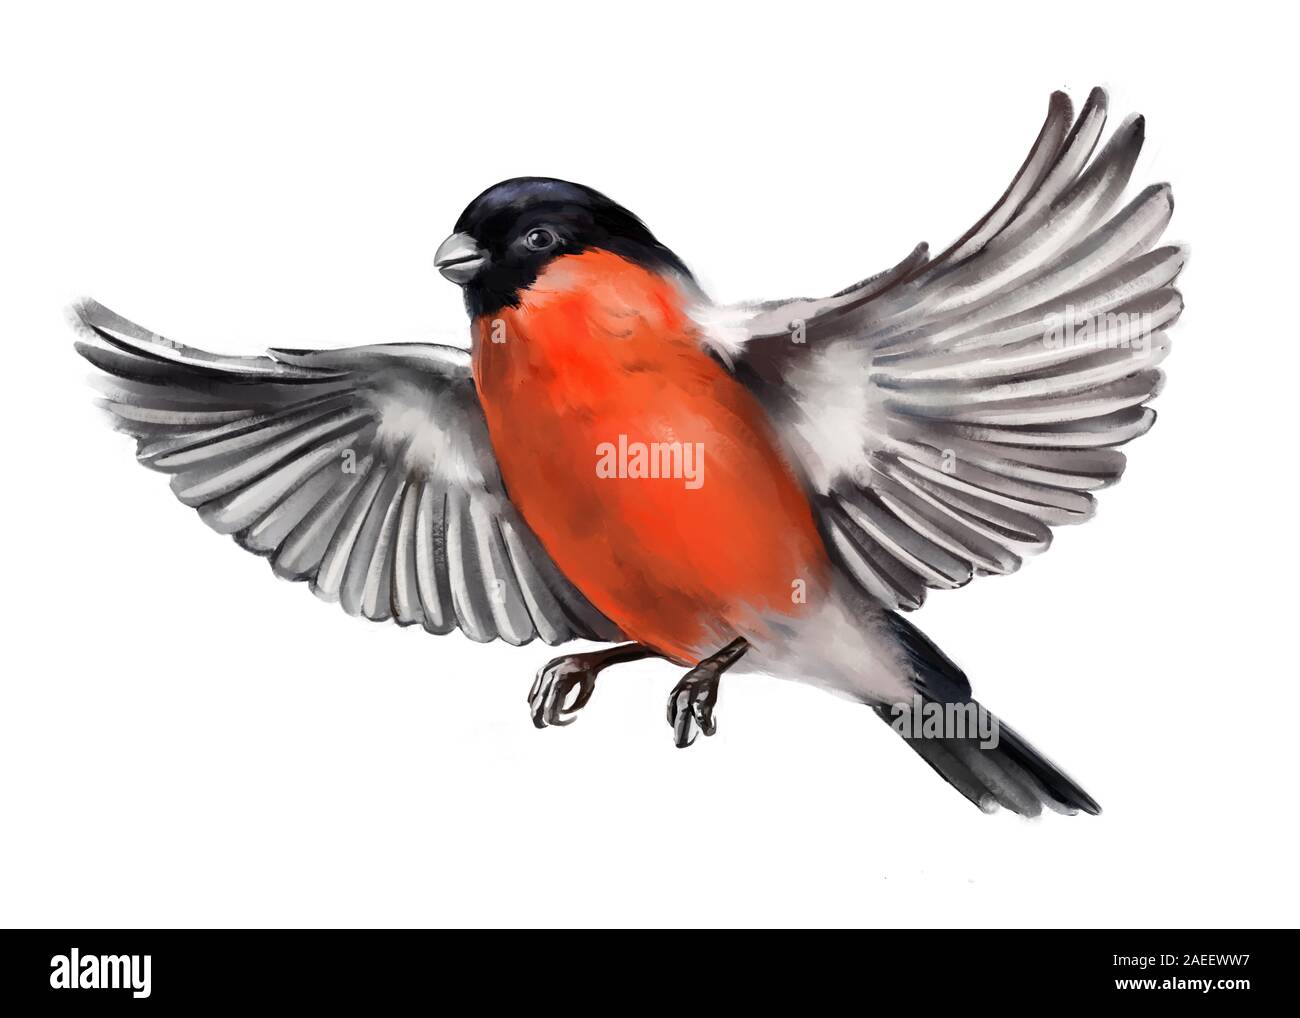 bullfinch bird flies with its wings spread, art illustration painted with watercolors isolated on white background. Stock Photo